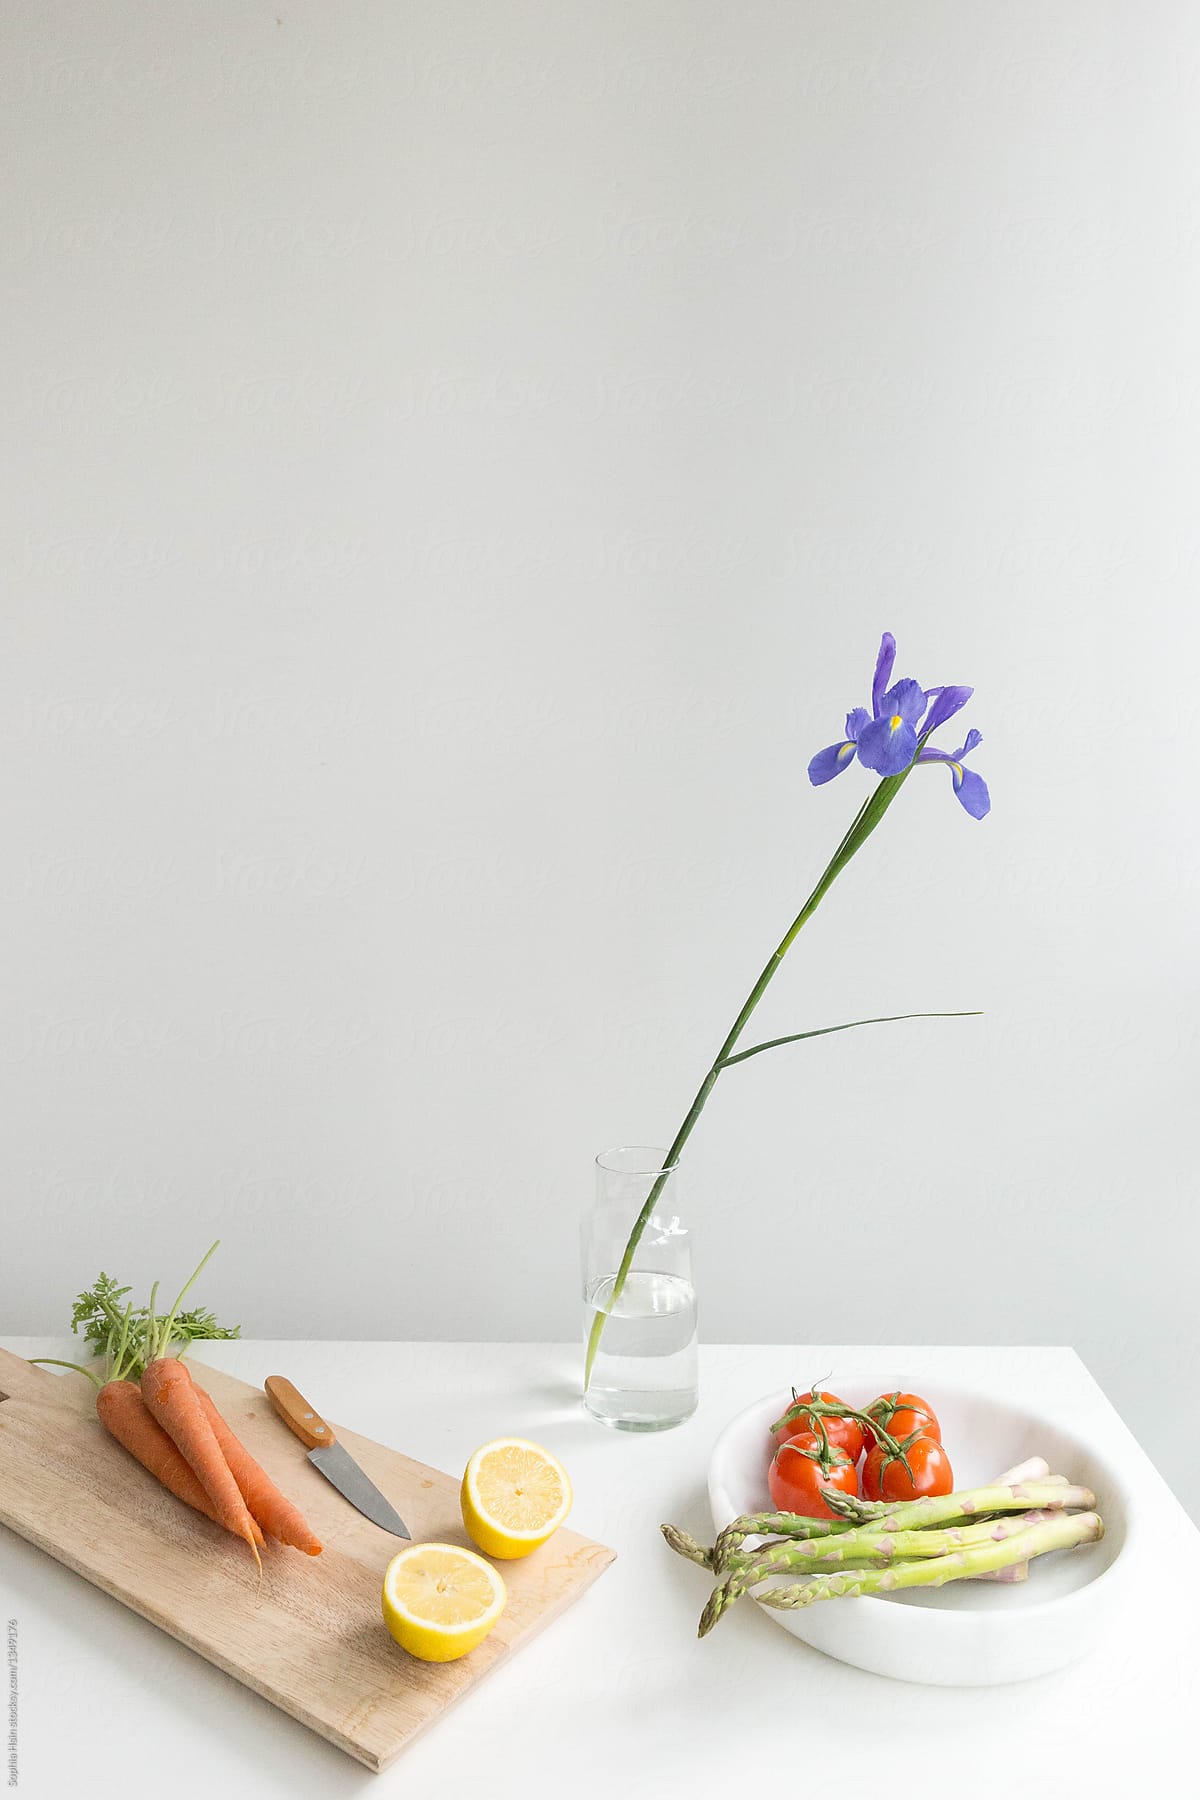 Vegetables on white table with single stem of purple iris